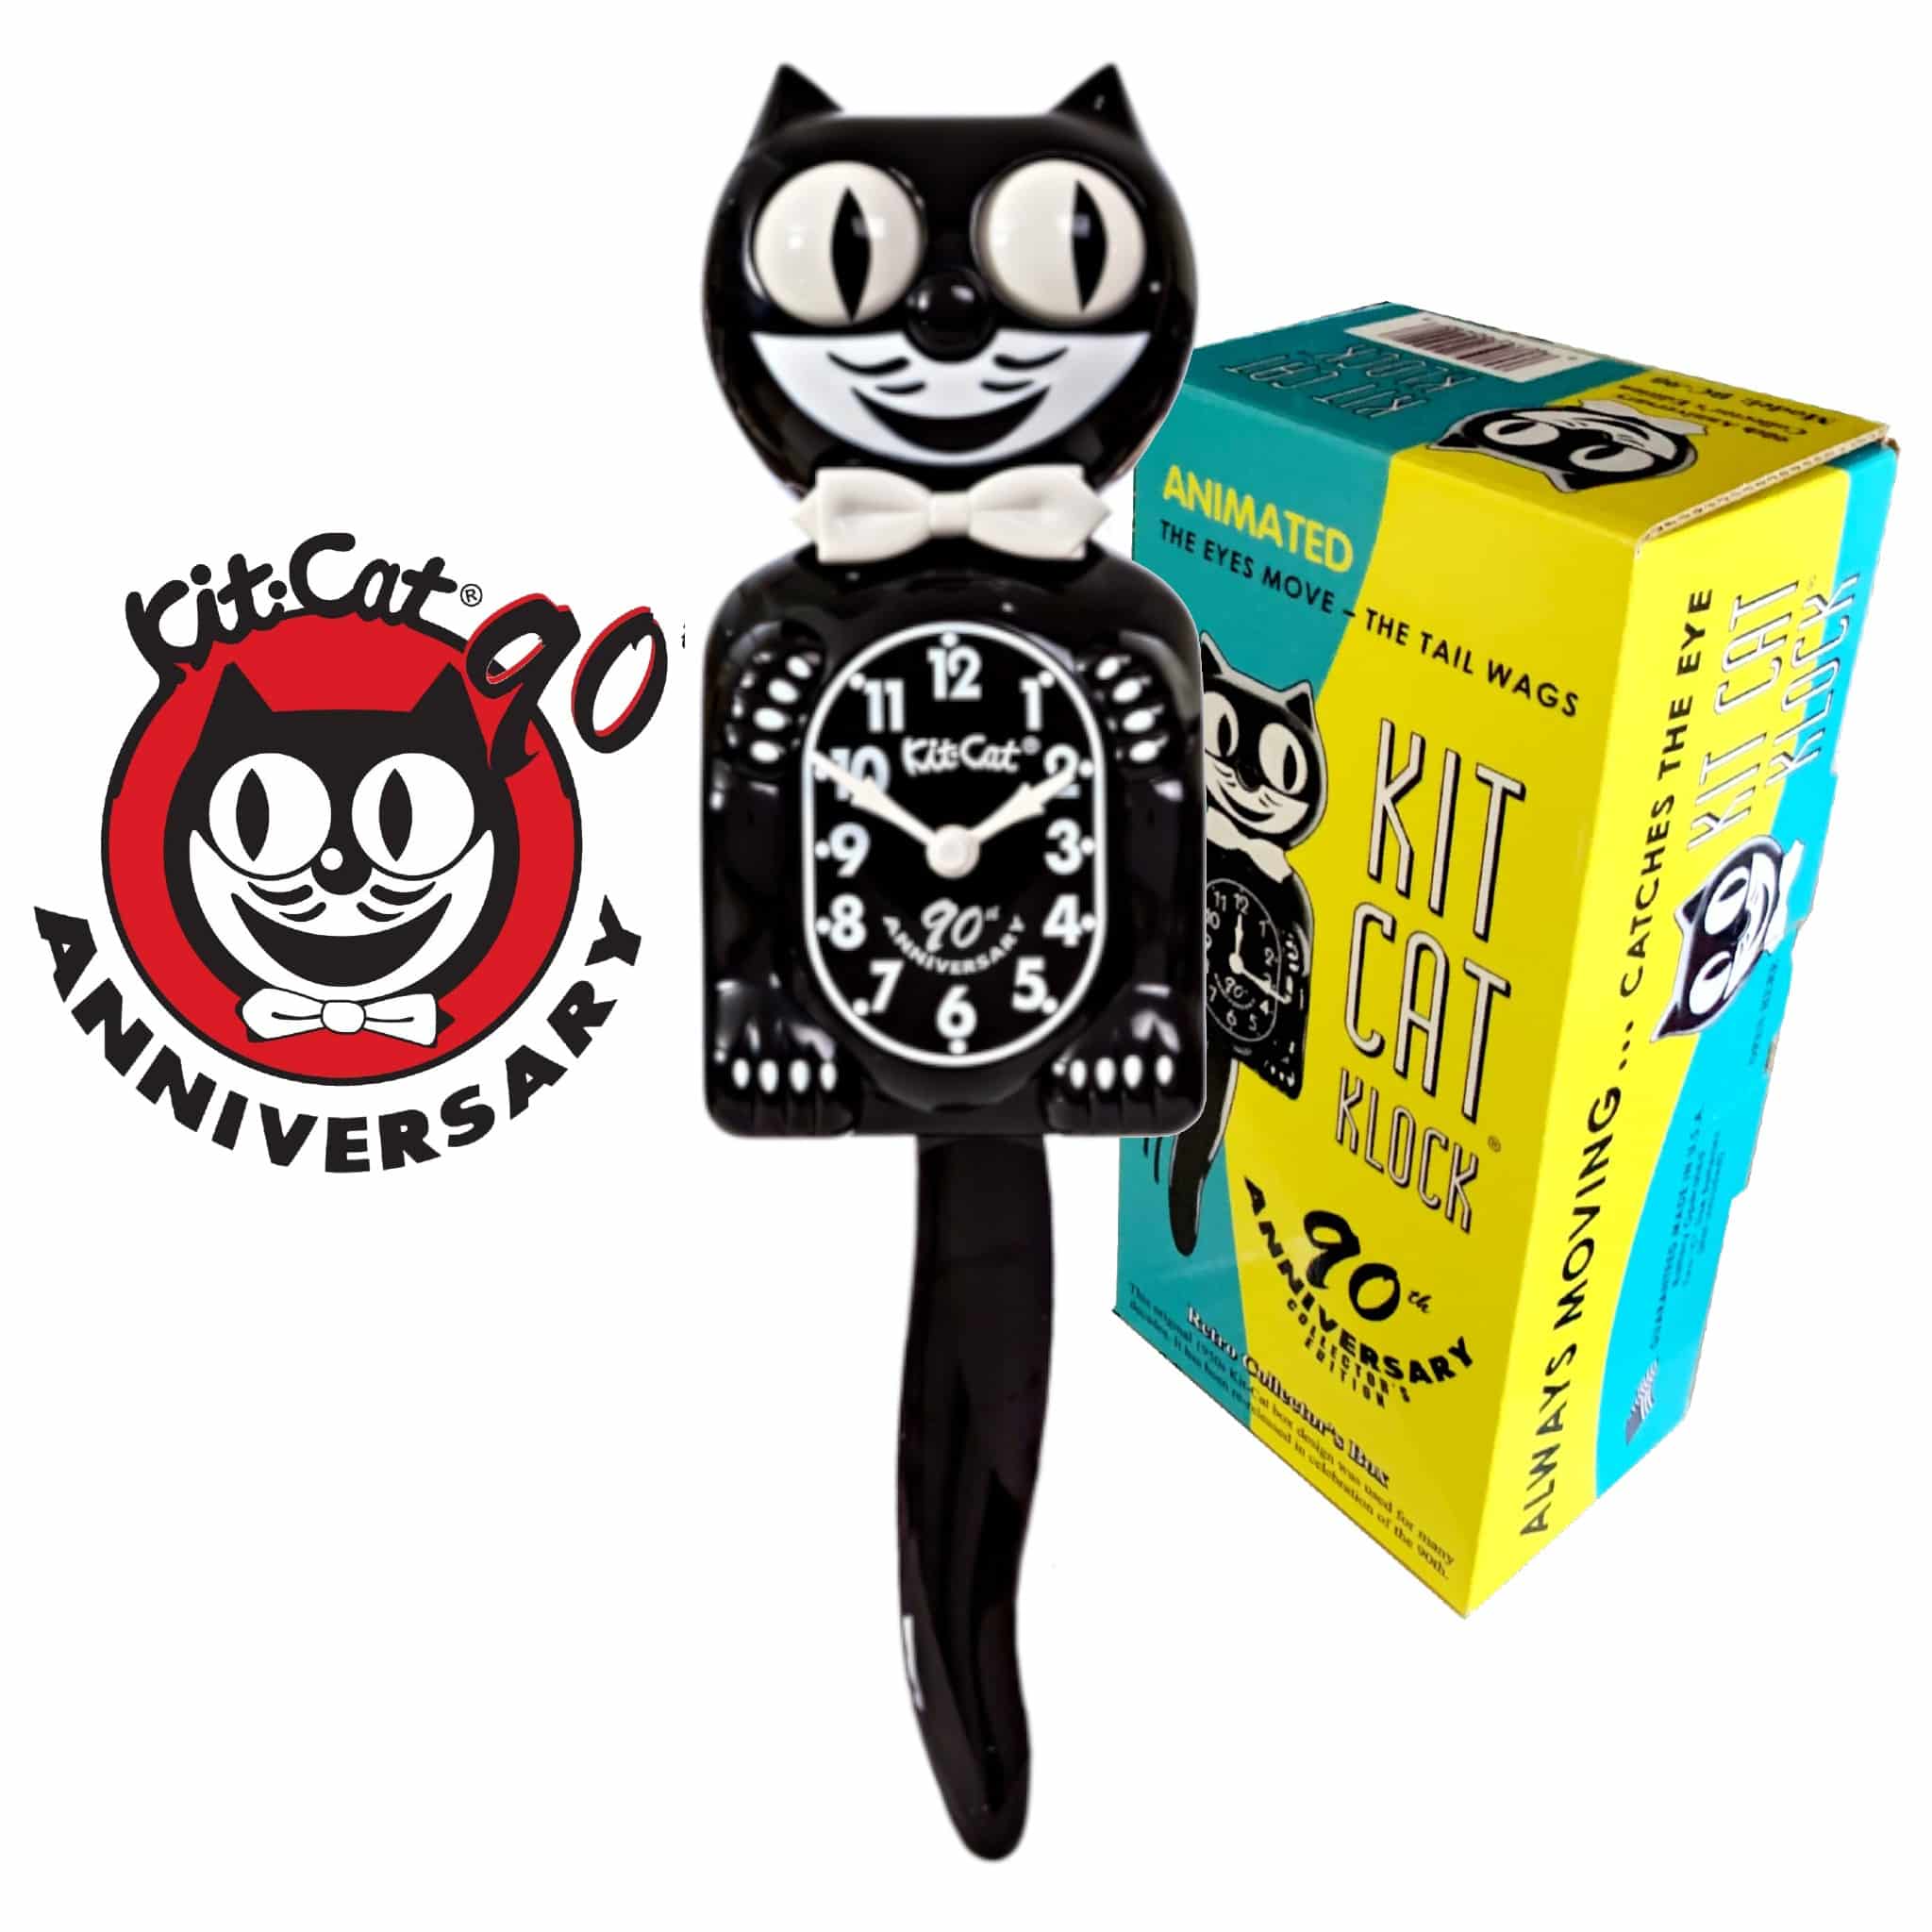 90th Anniversary Edition Kit-Cat Klock with Collectors Box